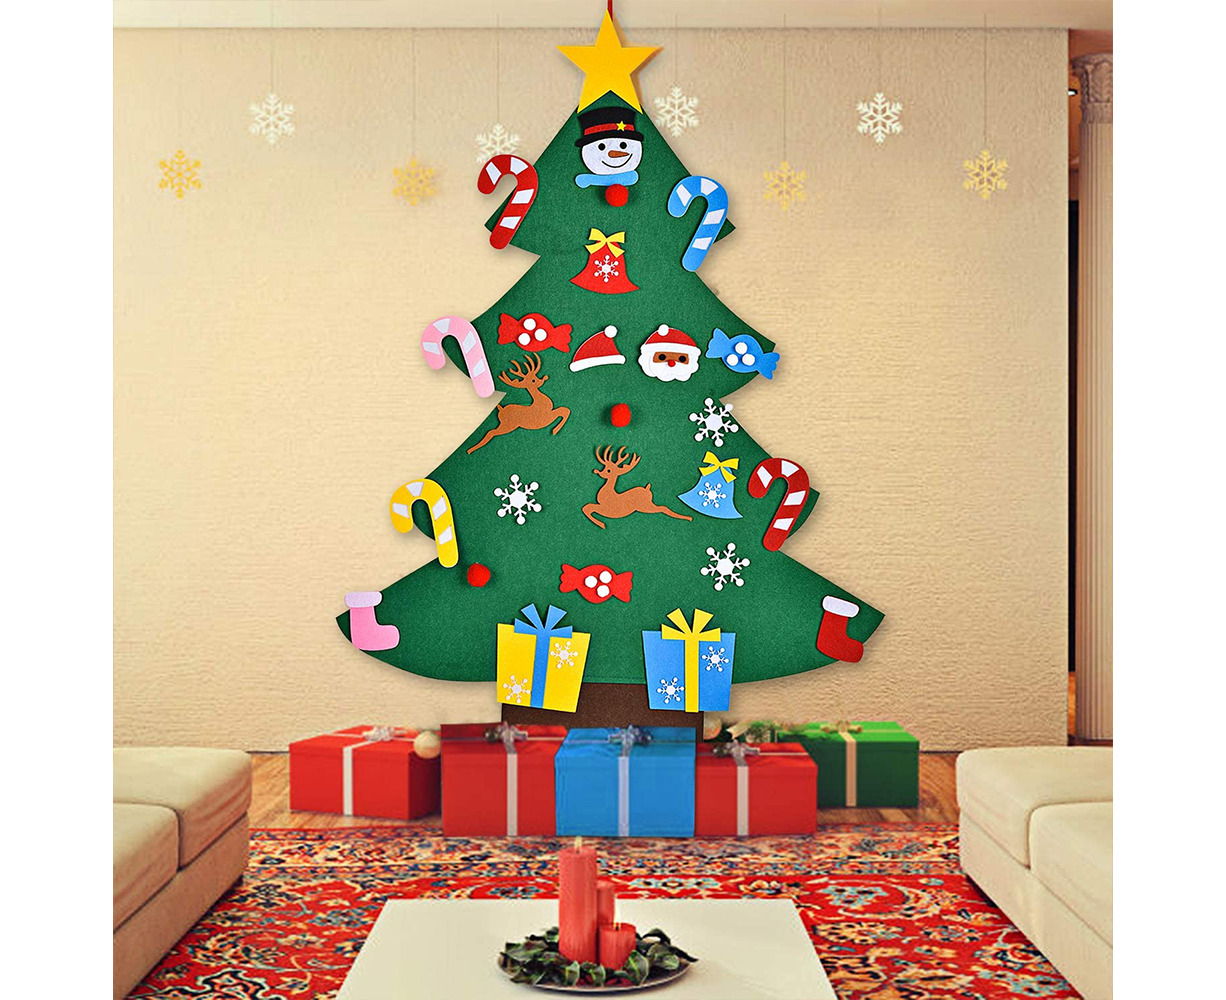 Red DIY Wall Christmas Tree with 30 Pcs Detachable Ornaments GIGIK Felt Christmas Tree Wall Decor with Hanging Tape for Kids & Xmas Gifts Home Decorations 